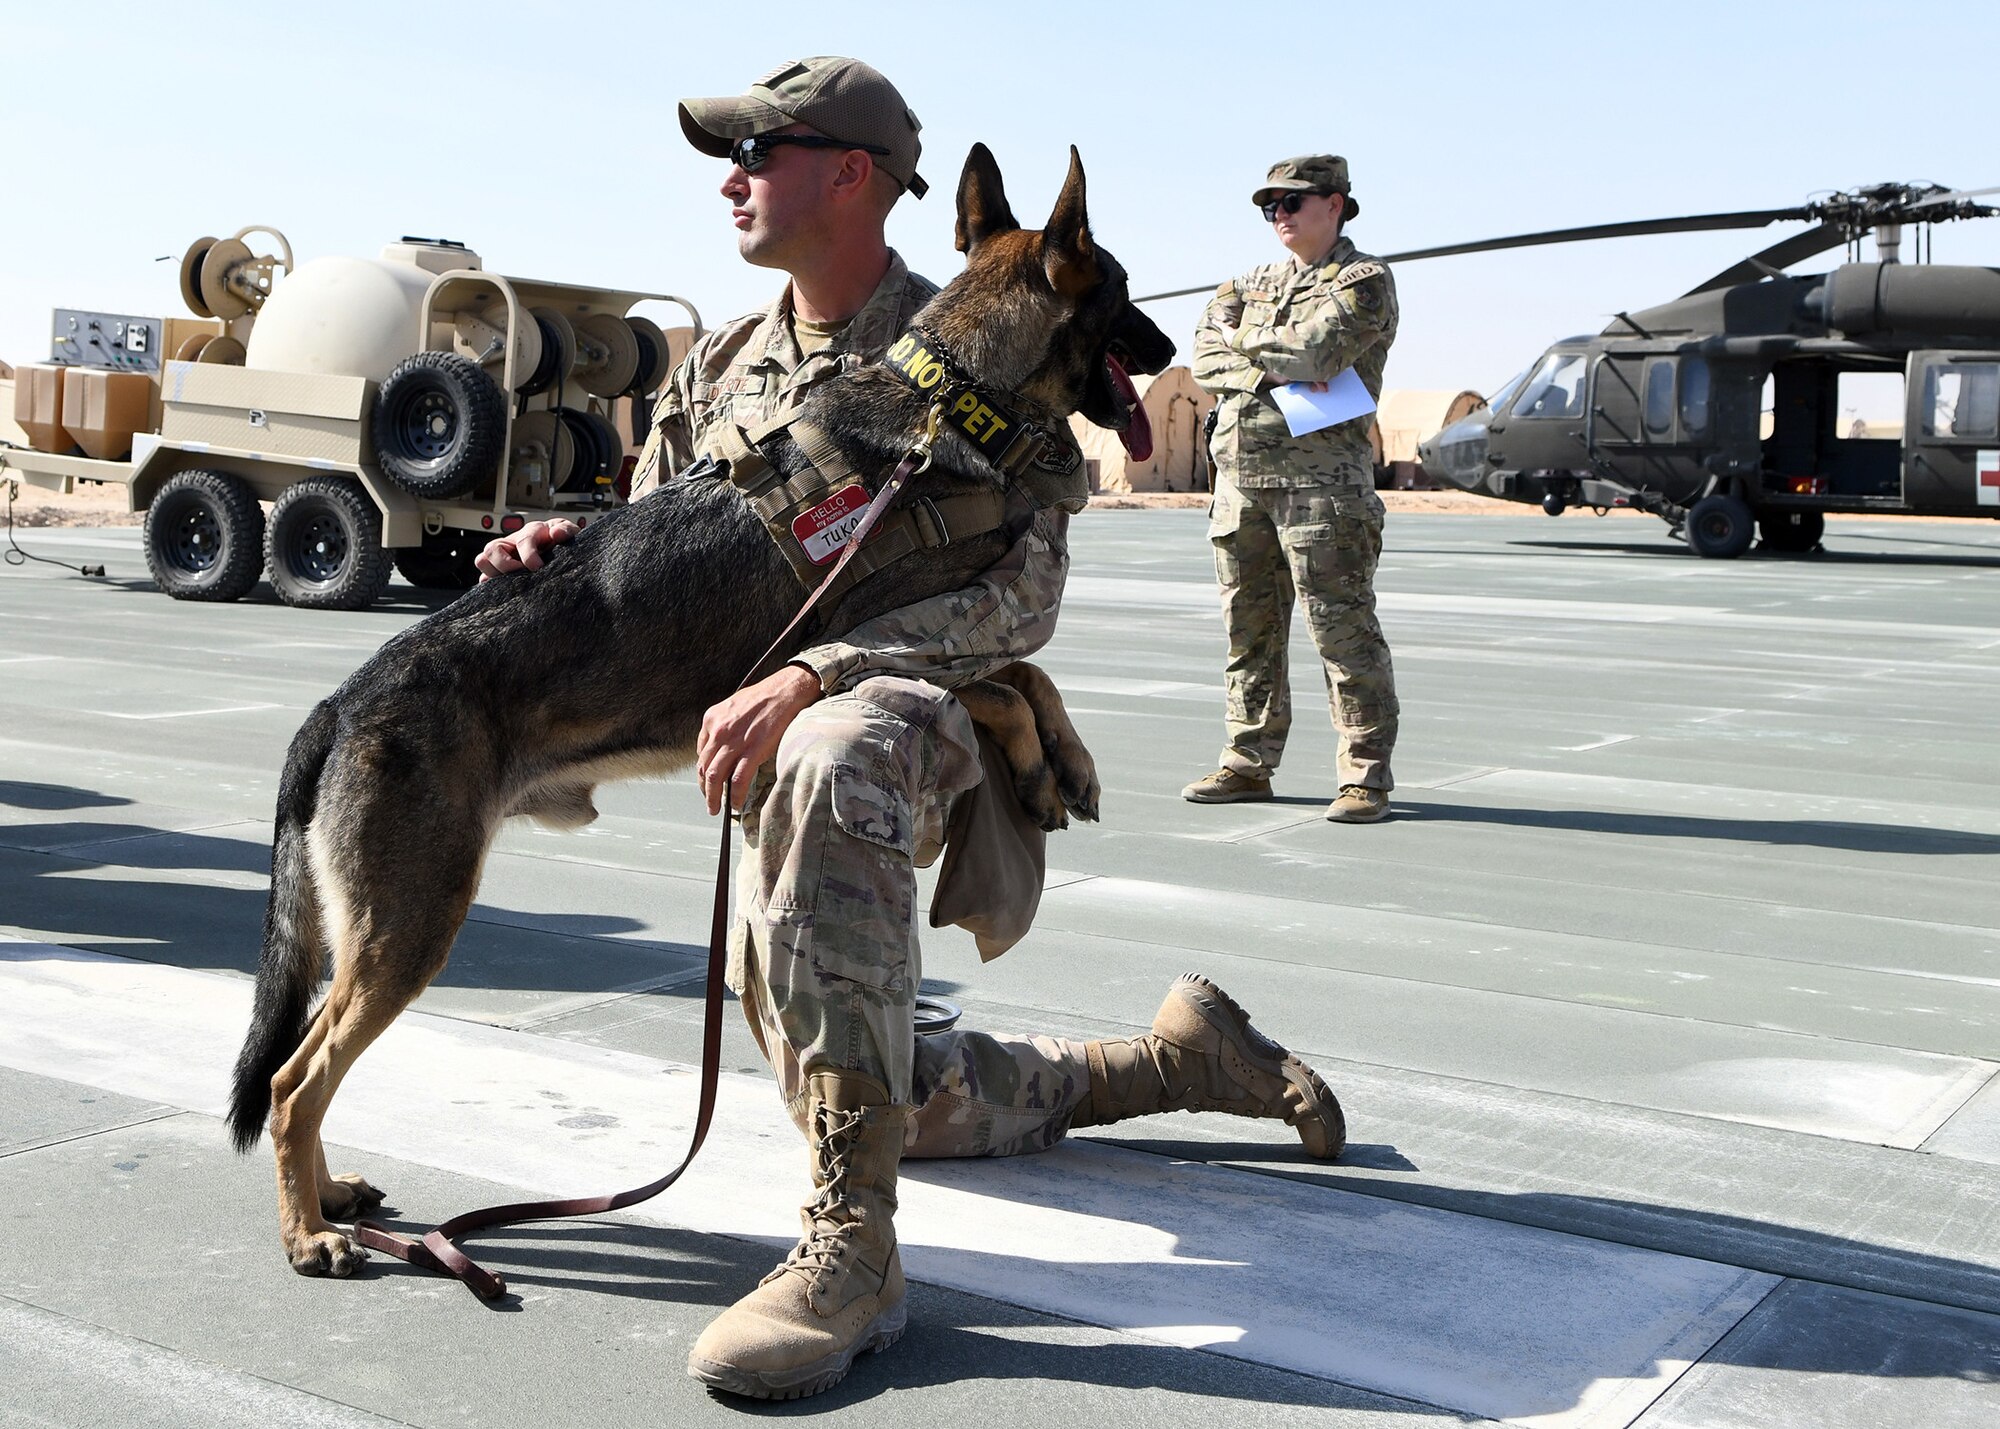 U.S. Air Force Staff Sgt. Daniel Duarte, 378th Expeditionary Security Forces Squadron K-9 handler, and his military working dog, Tuko, watch as U.S. Army personnel brief on medical evacuation techniques at Prince Sultan Air Base, Saudi Arabi, Nov. 27, 2019.